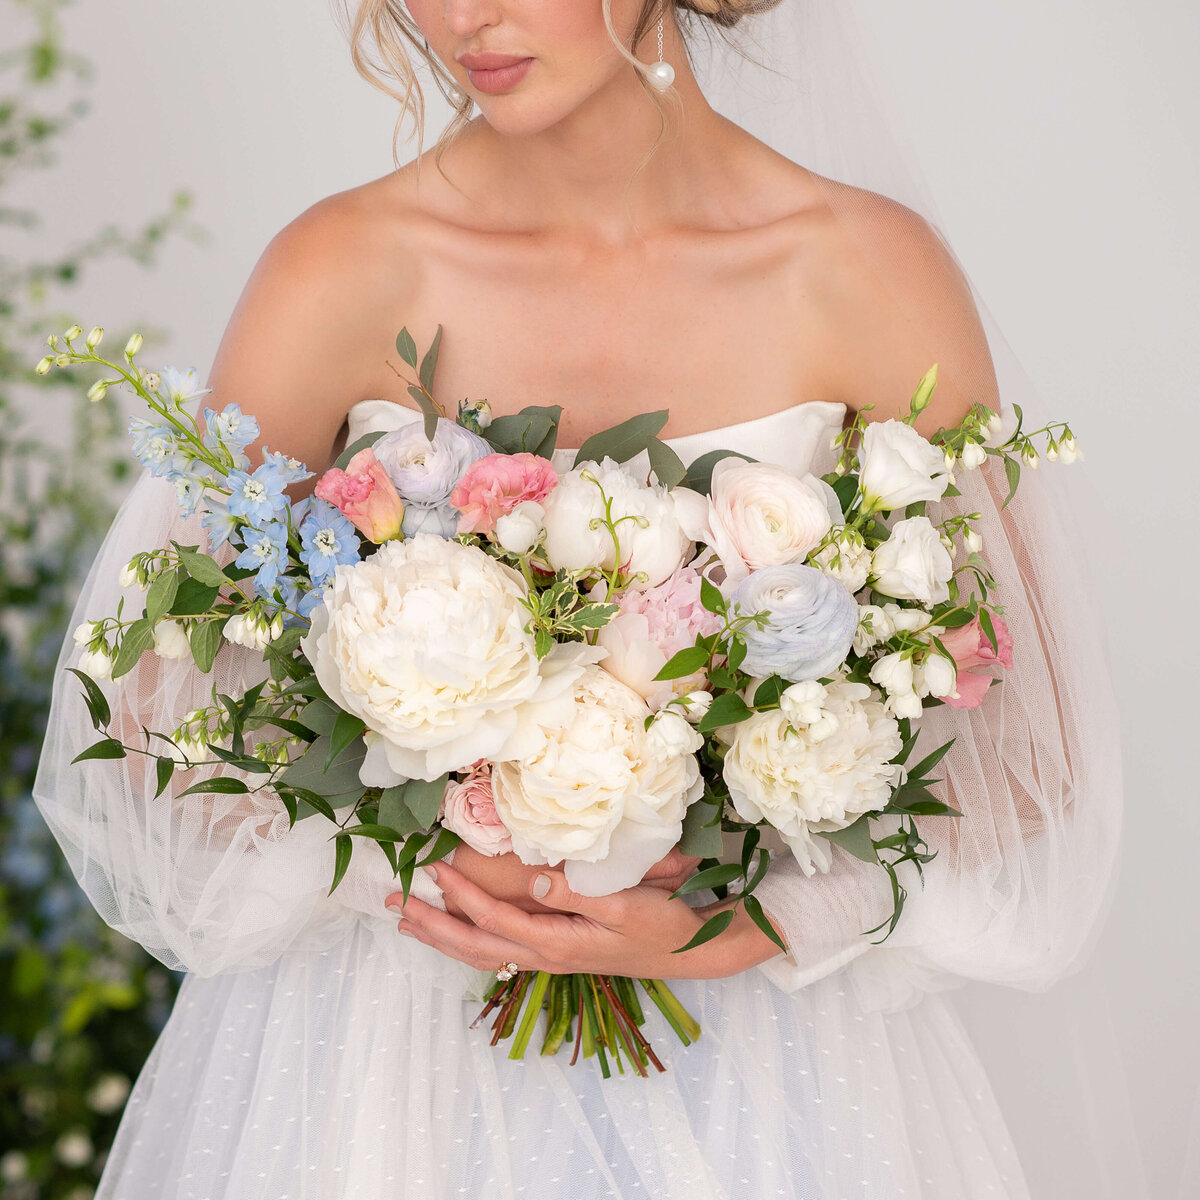 Ottawa wedding photography showing a closeup of bridal bouquet that has an assortment of white, blush and blue flowers